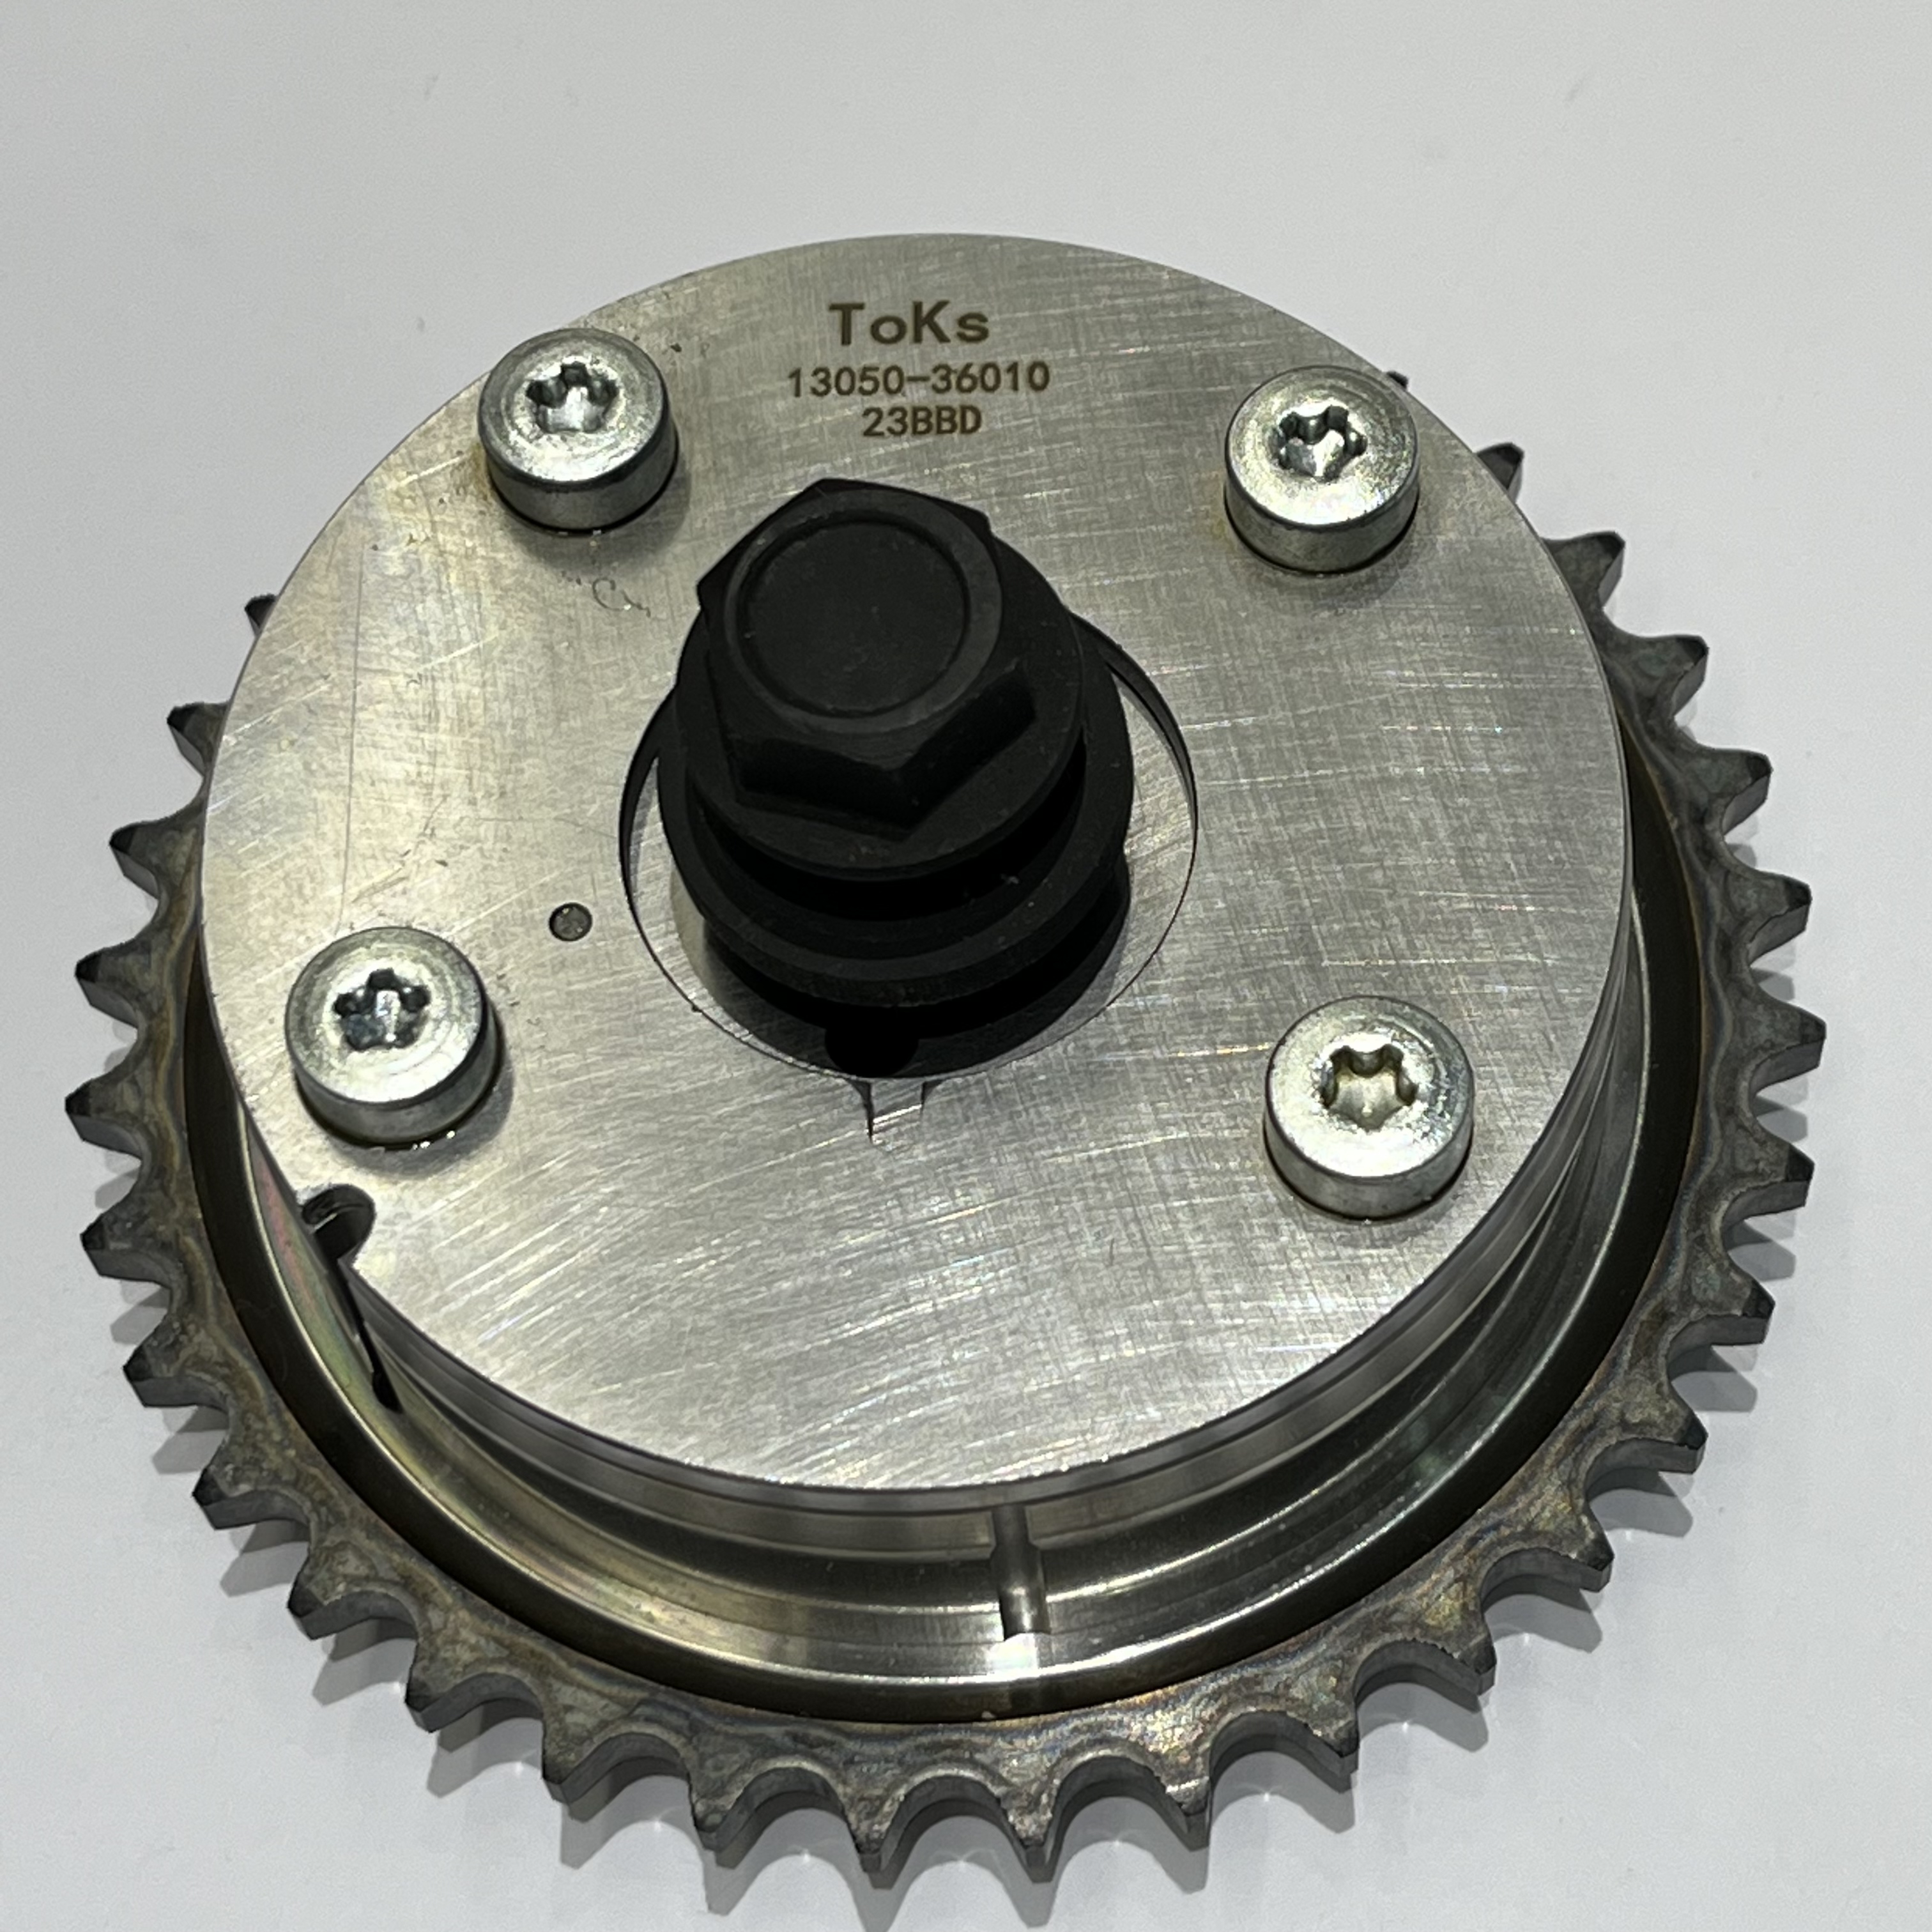 13050-36010 high quality good price Exhaust Timing Chain Gear VVT Gear CamPhaser Camshaft Sprocket Camshaft Adjuster for Toyota